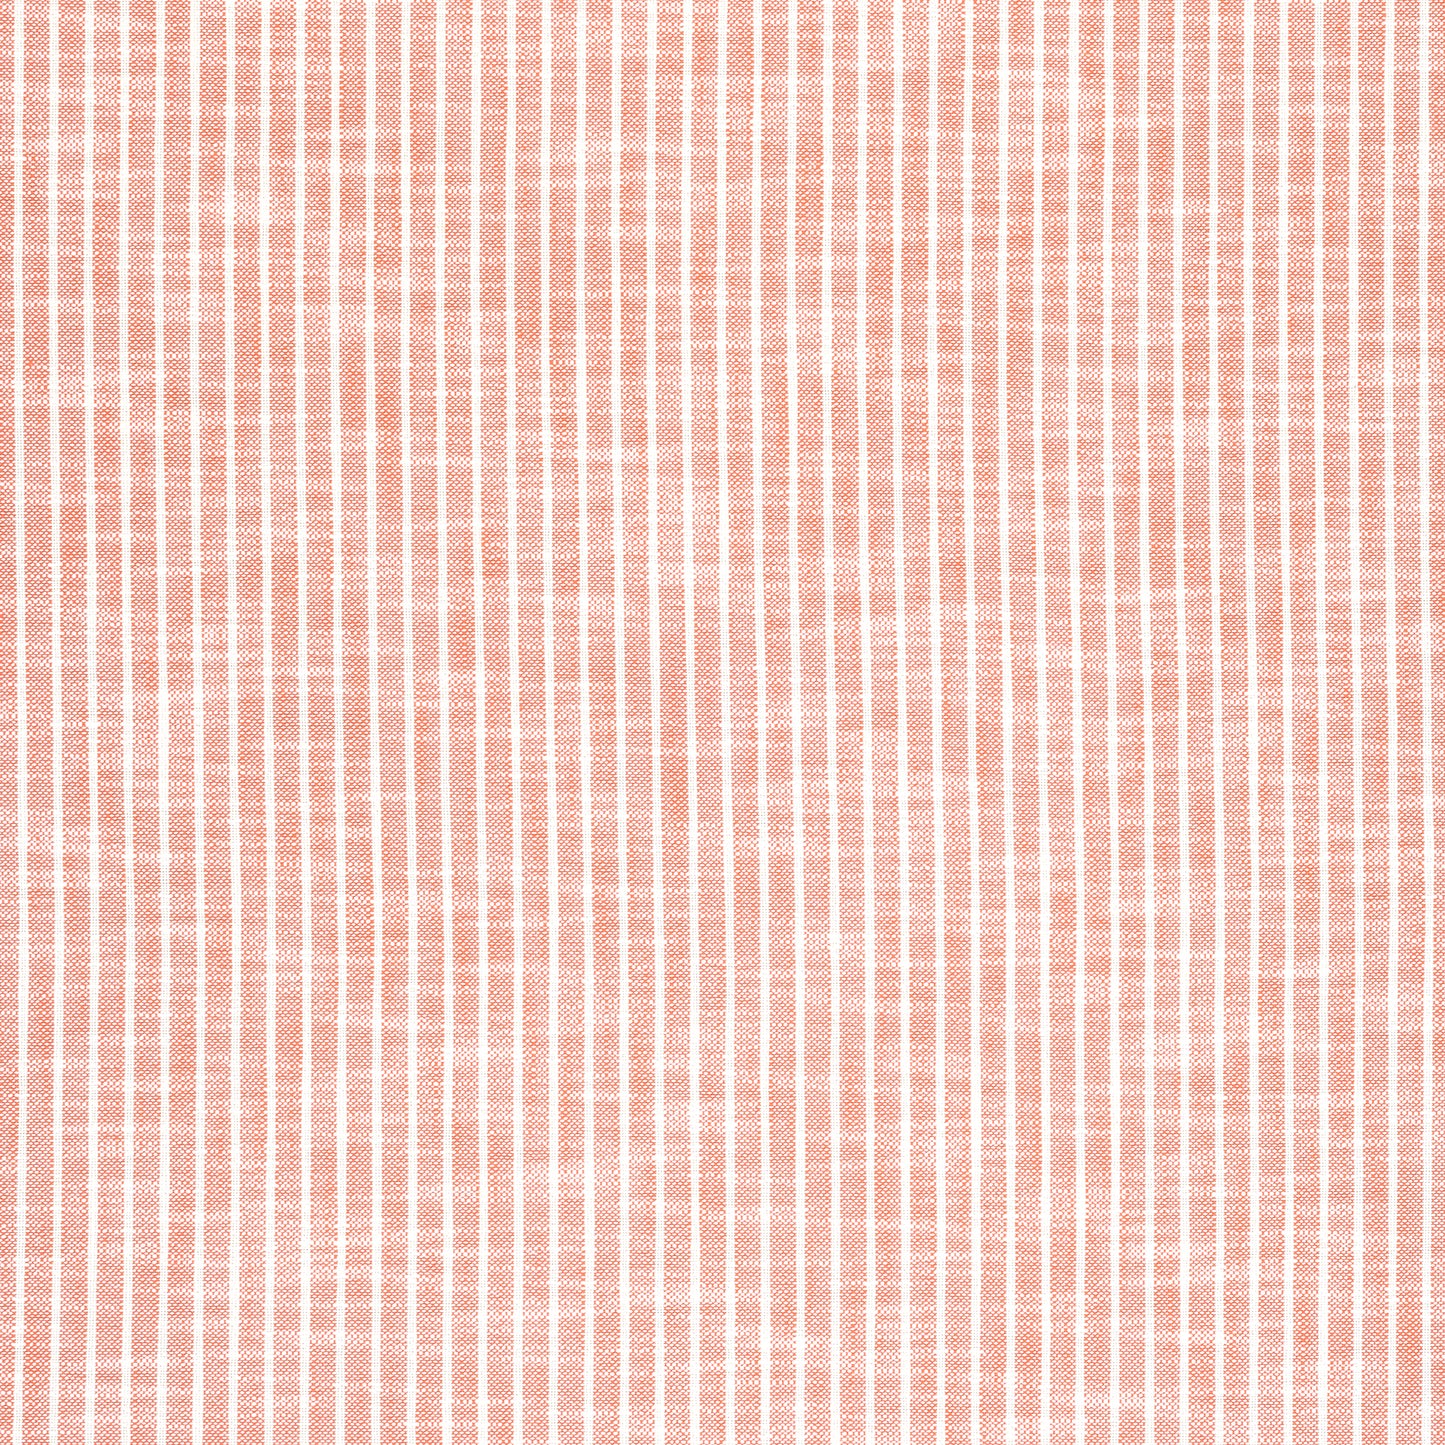 Purchase Thibaut Fabric Product# W73472 pattern name Bayside Stripe color Coral